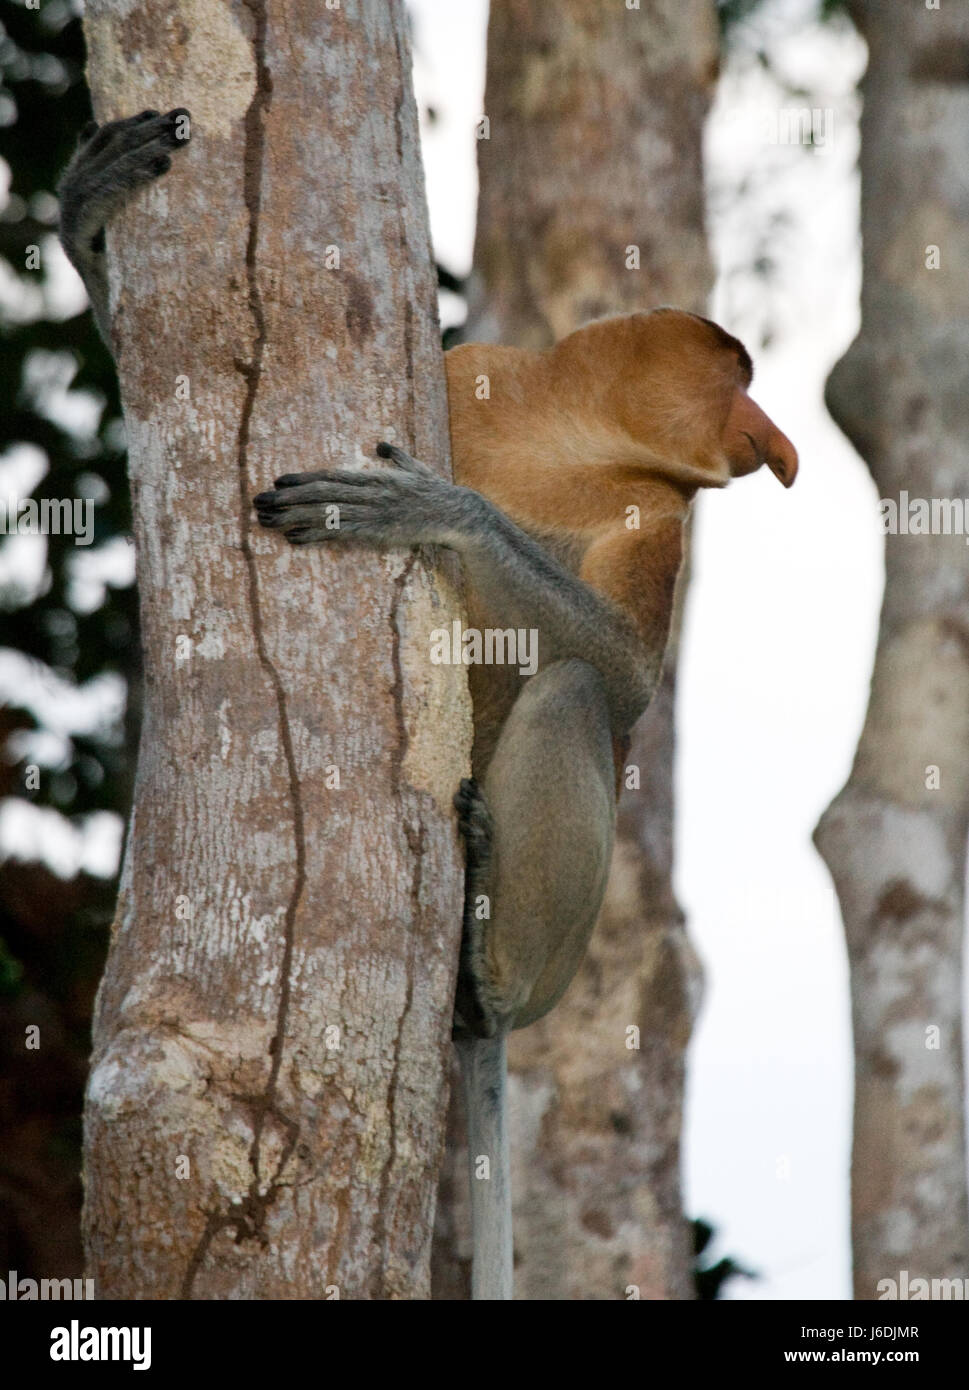 The proboscis monkey is sitting on a tree in the jungle. Indonesia. The island of Borneo (Kalimantan). Stock Photo